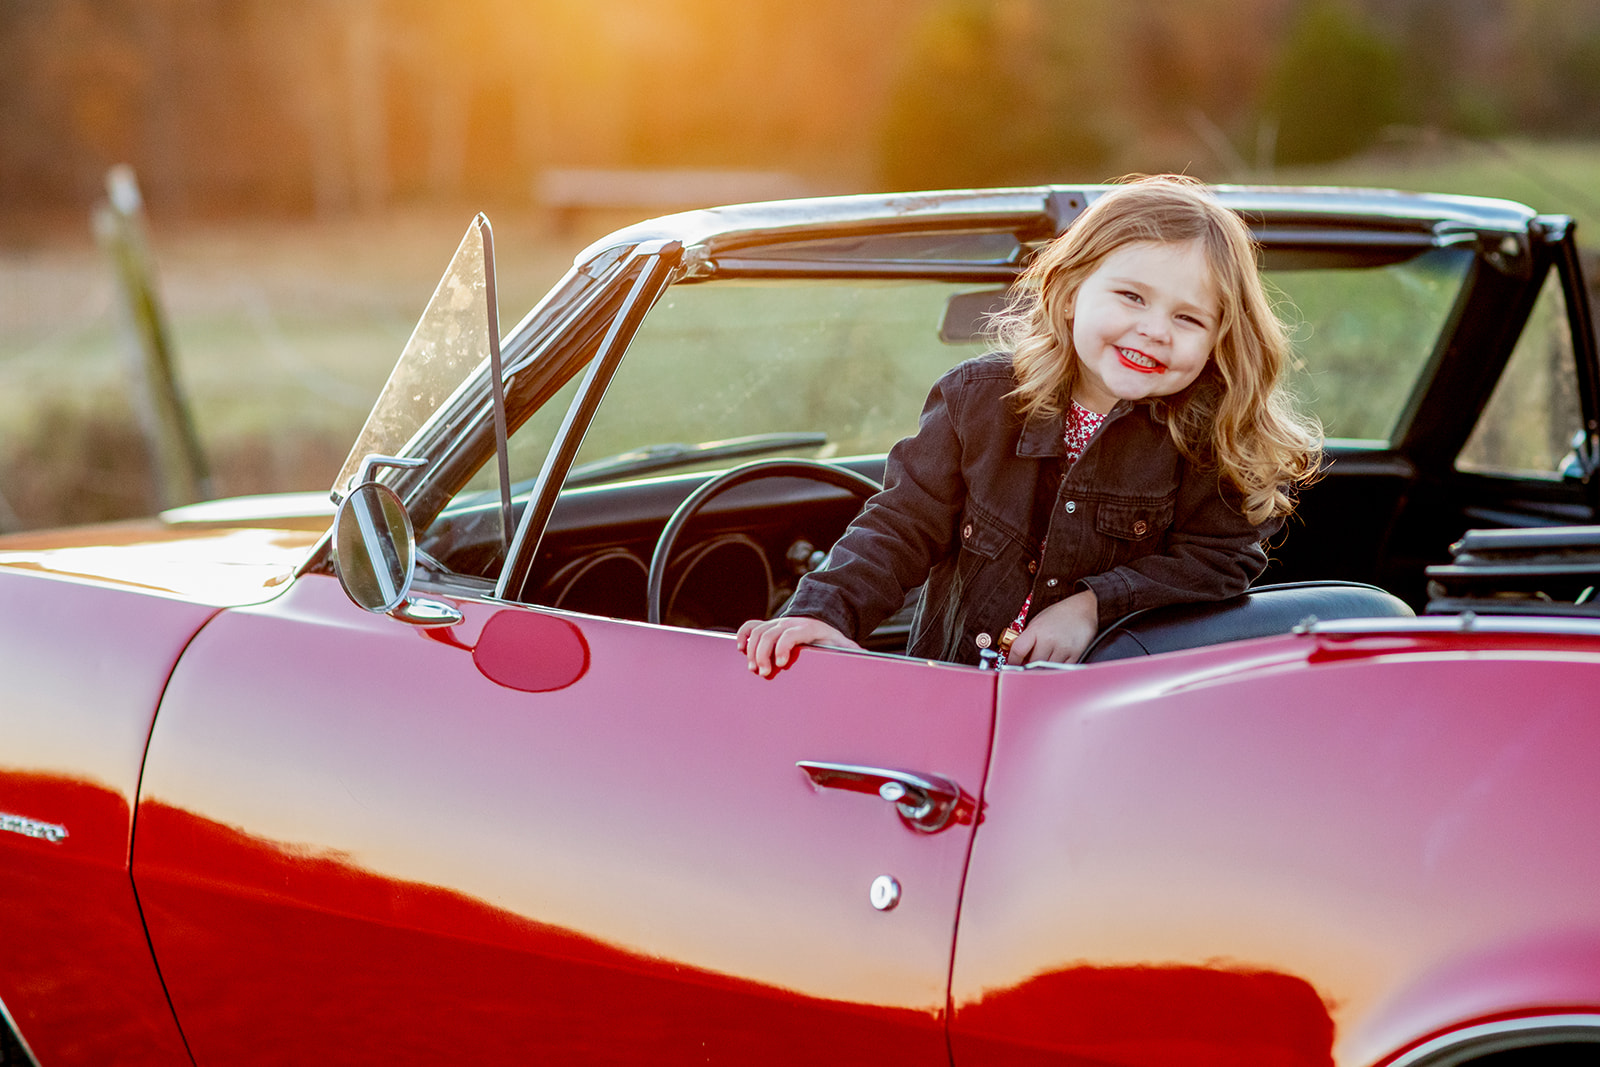 Bogue Family Photos with a Vintage Red Camaro - Image Property of www.j-dphoto.com